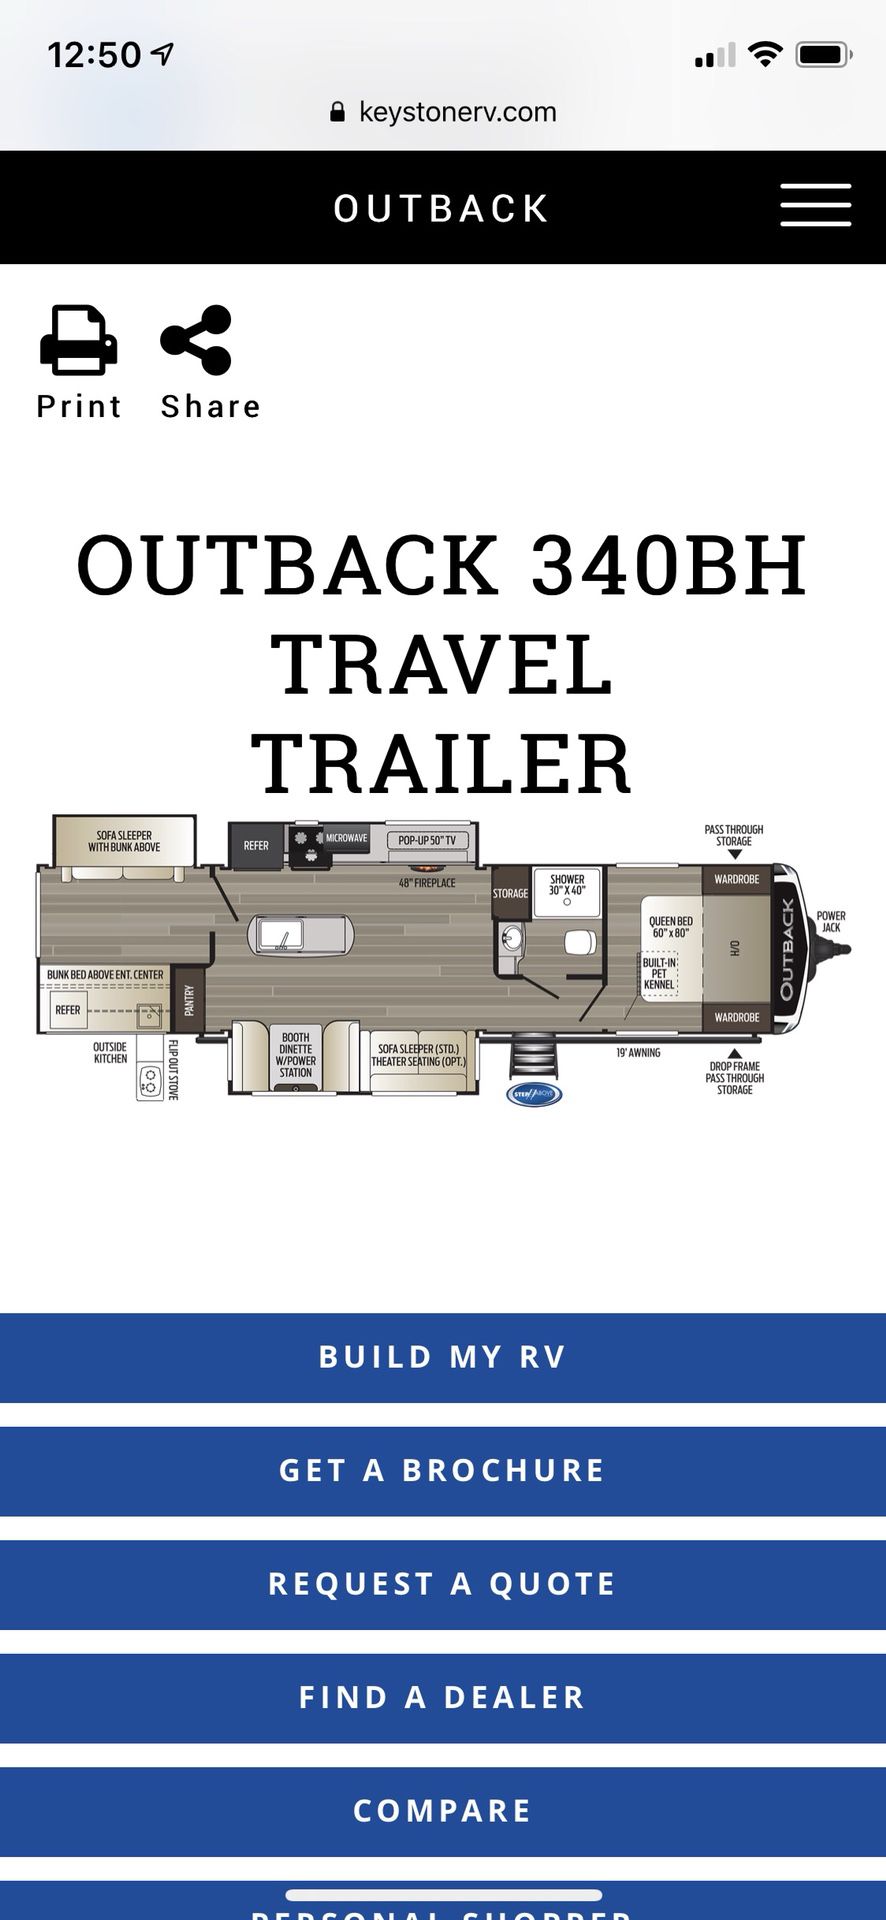 Outback 340BH Travel Trailer 2019